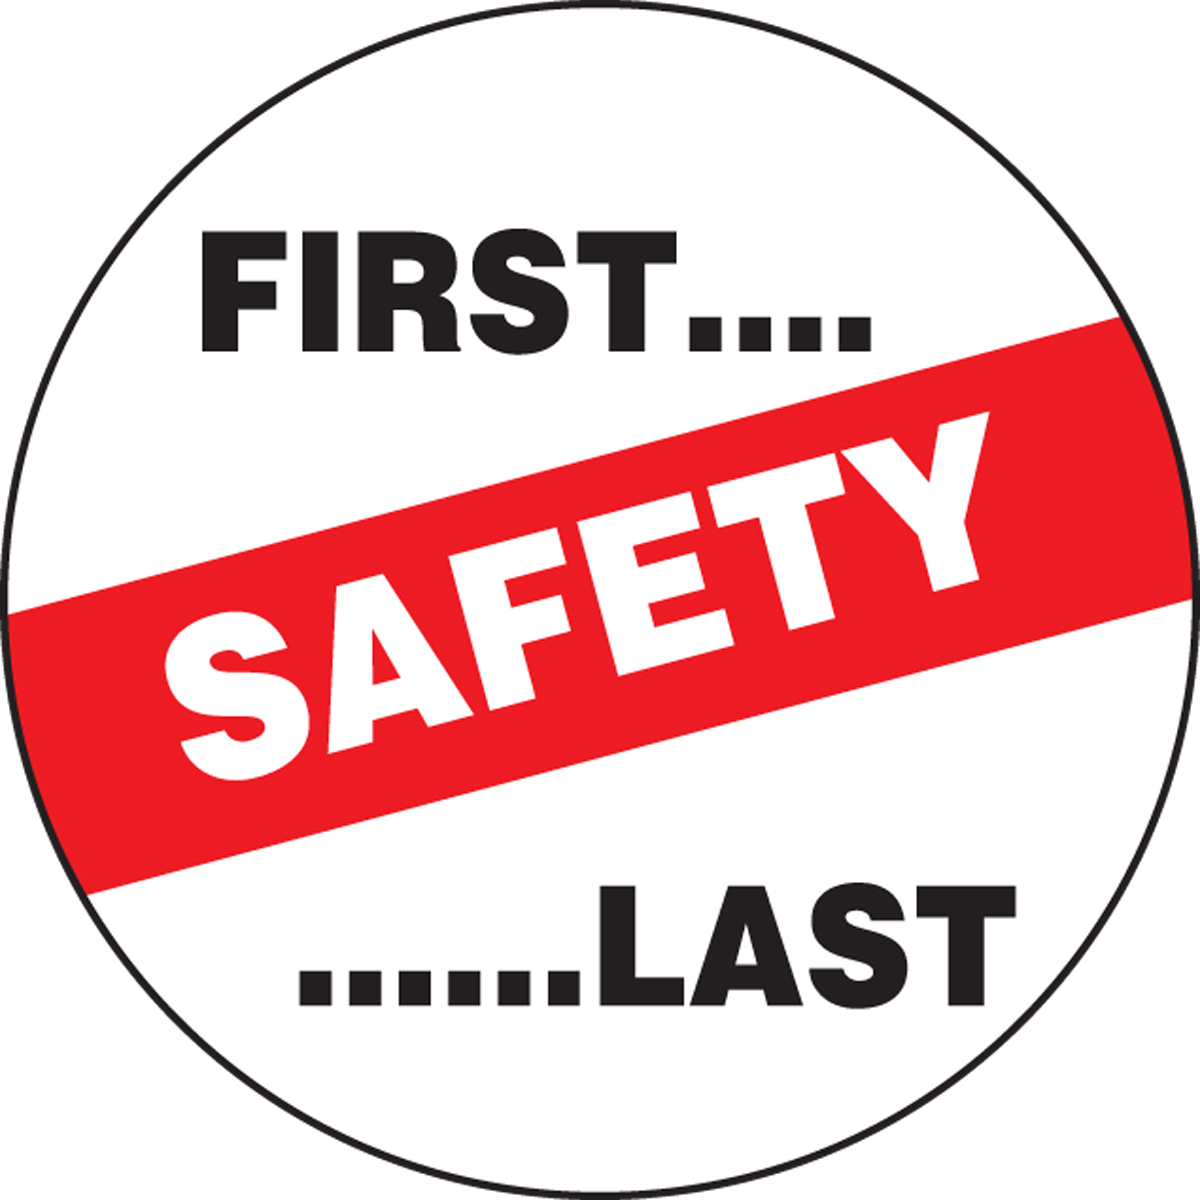 FIRST….SAFETY……LAST